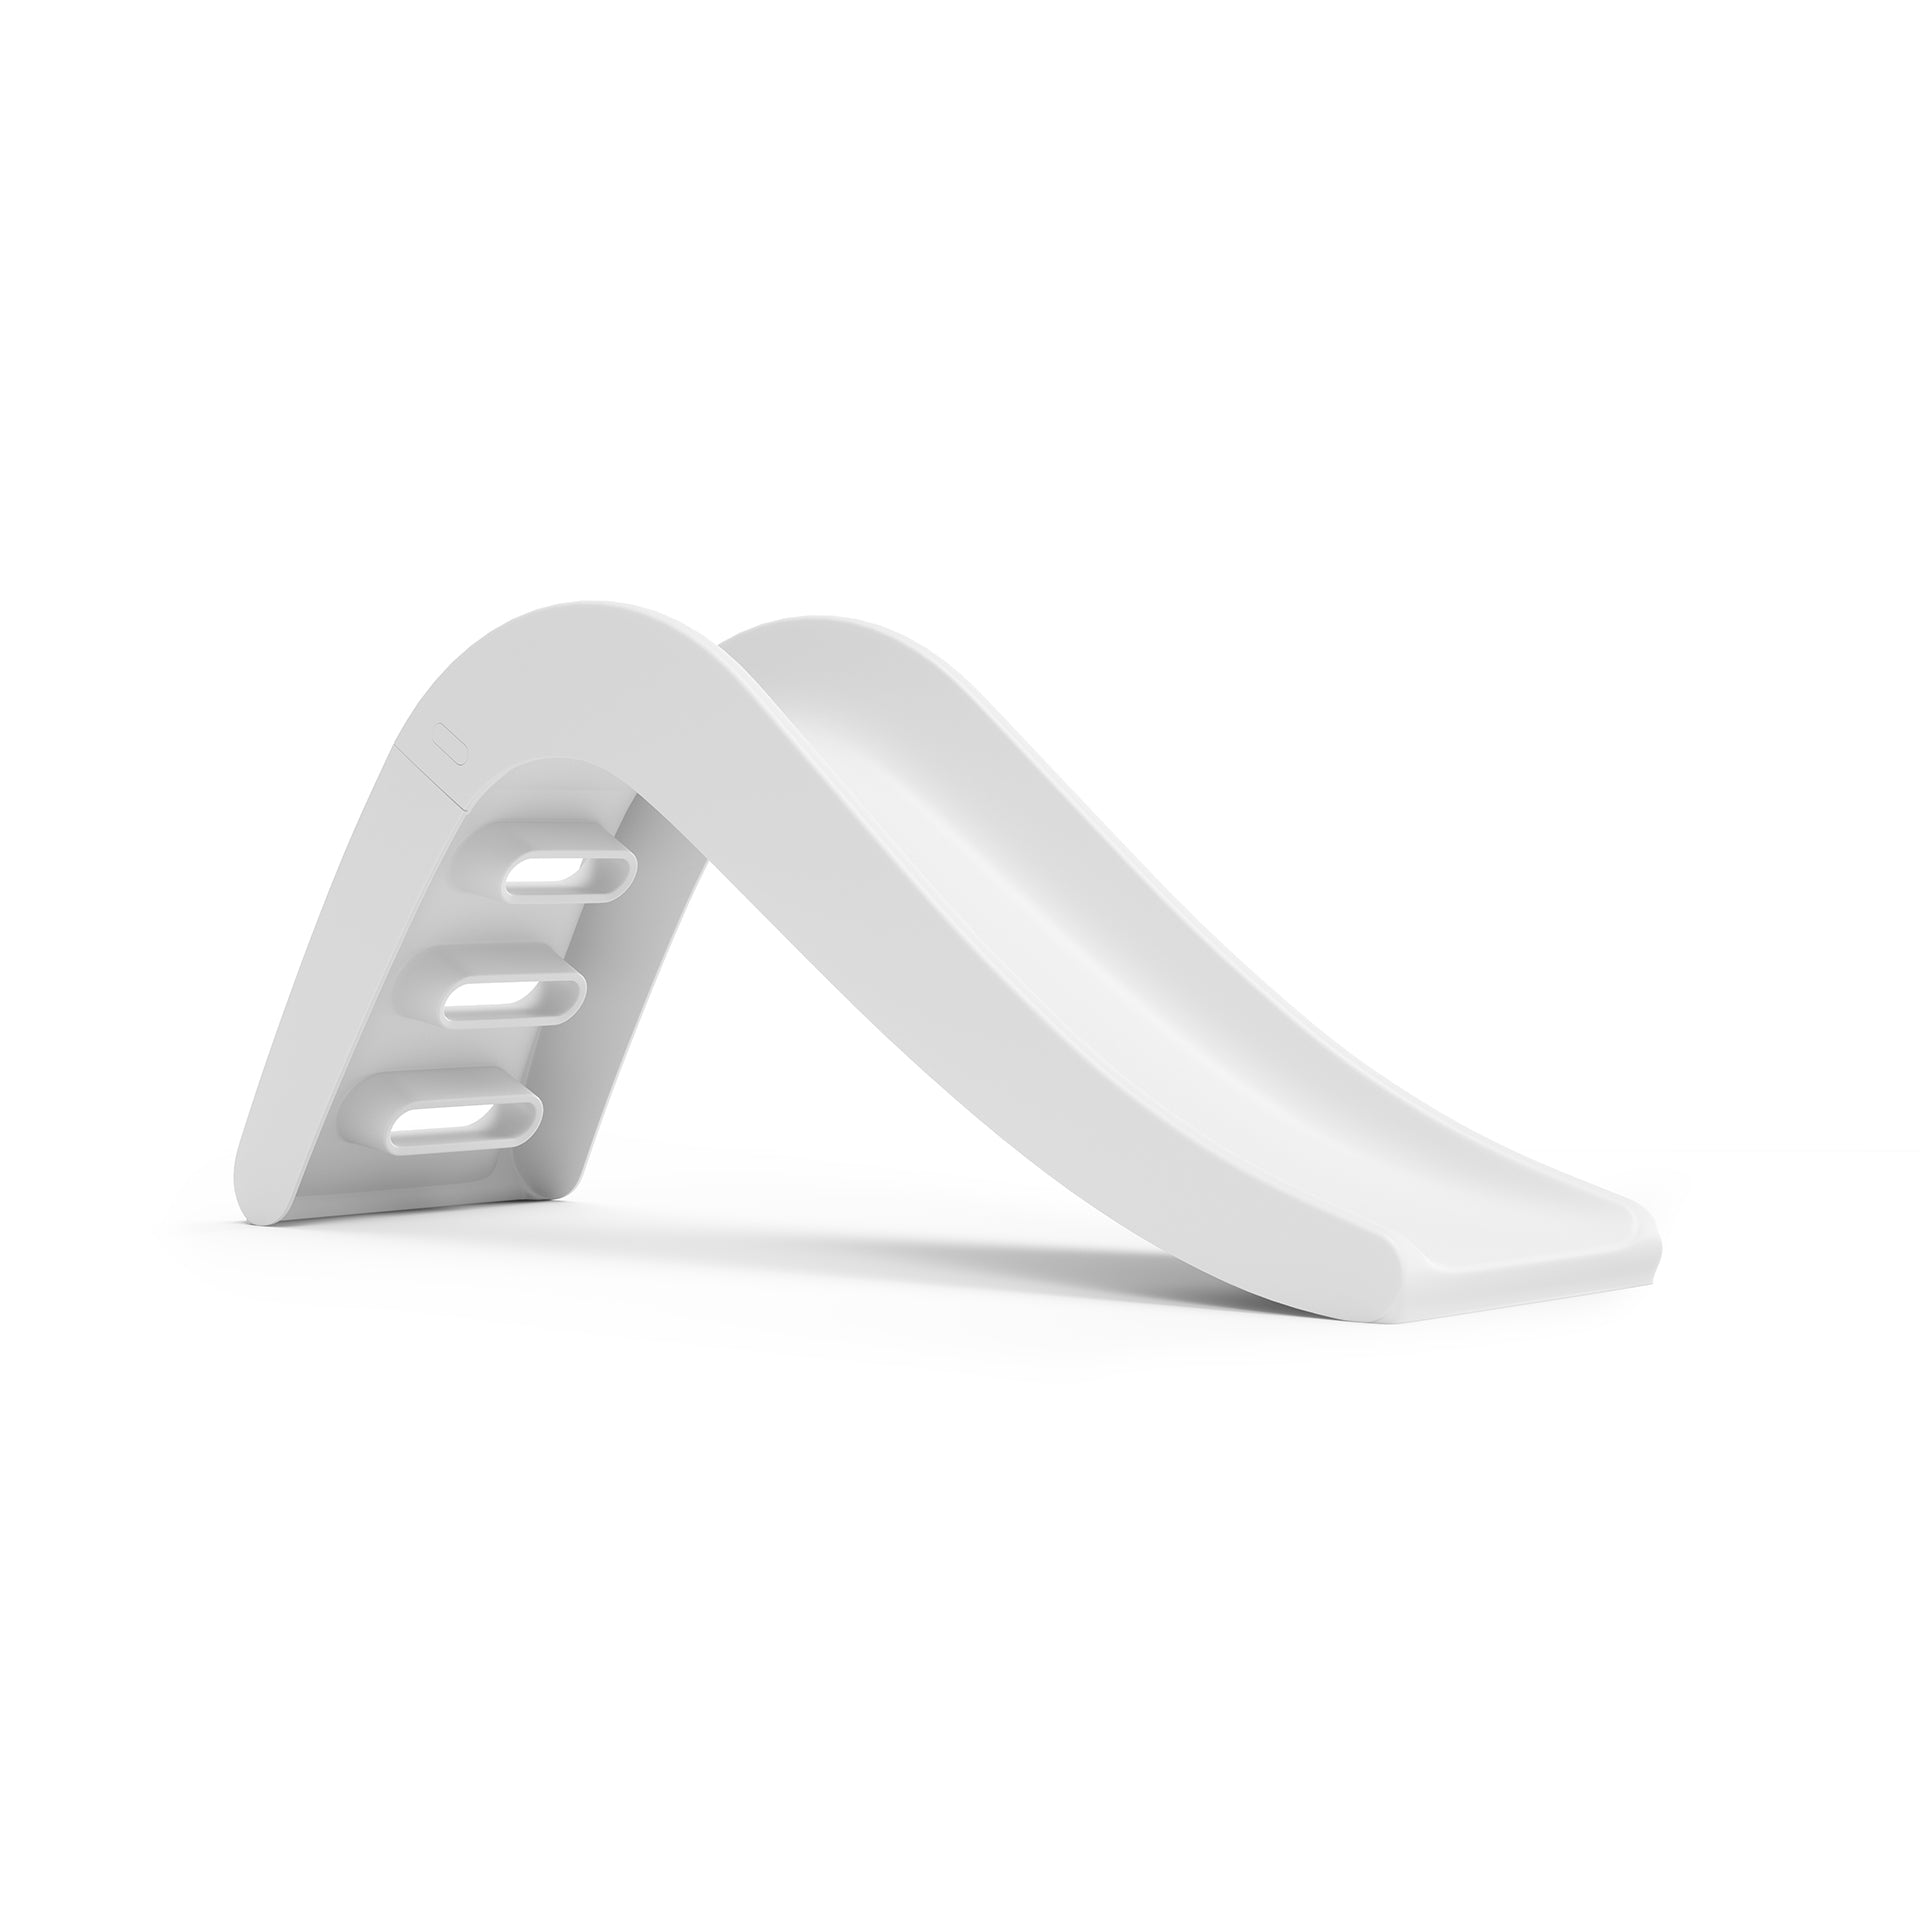 Jupiduu Recyclable Outdoor Slide - White